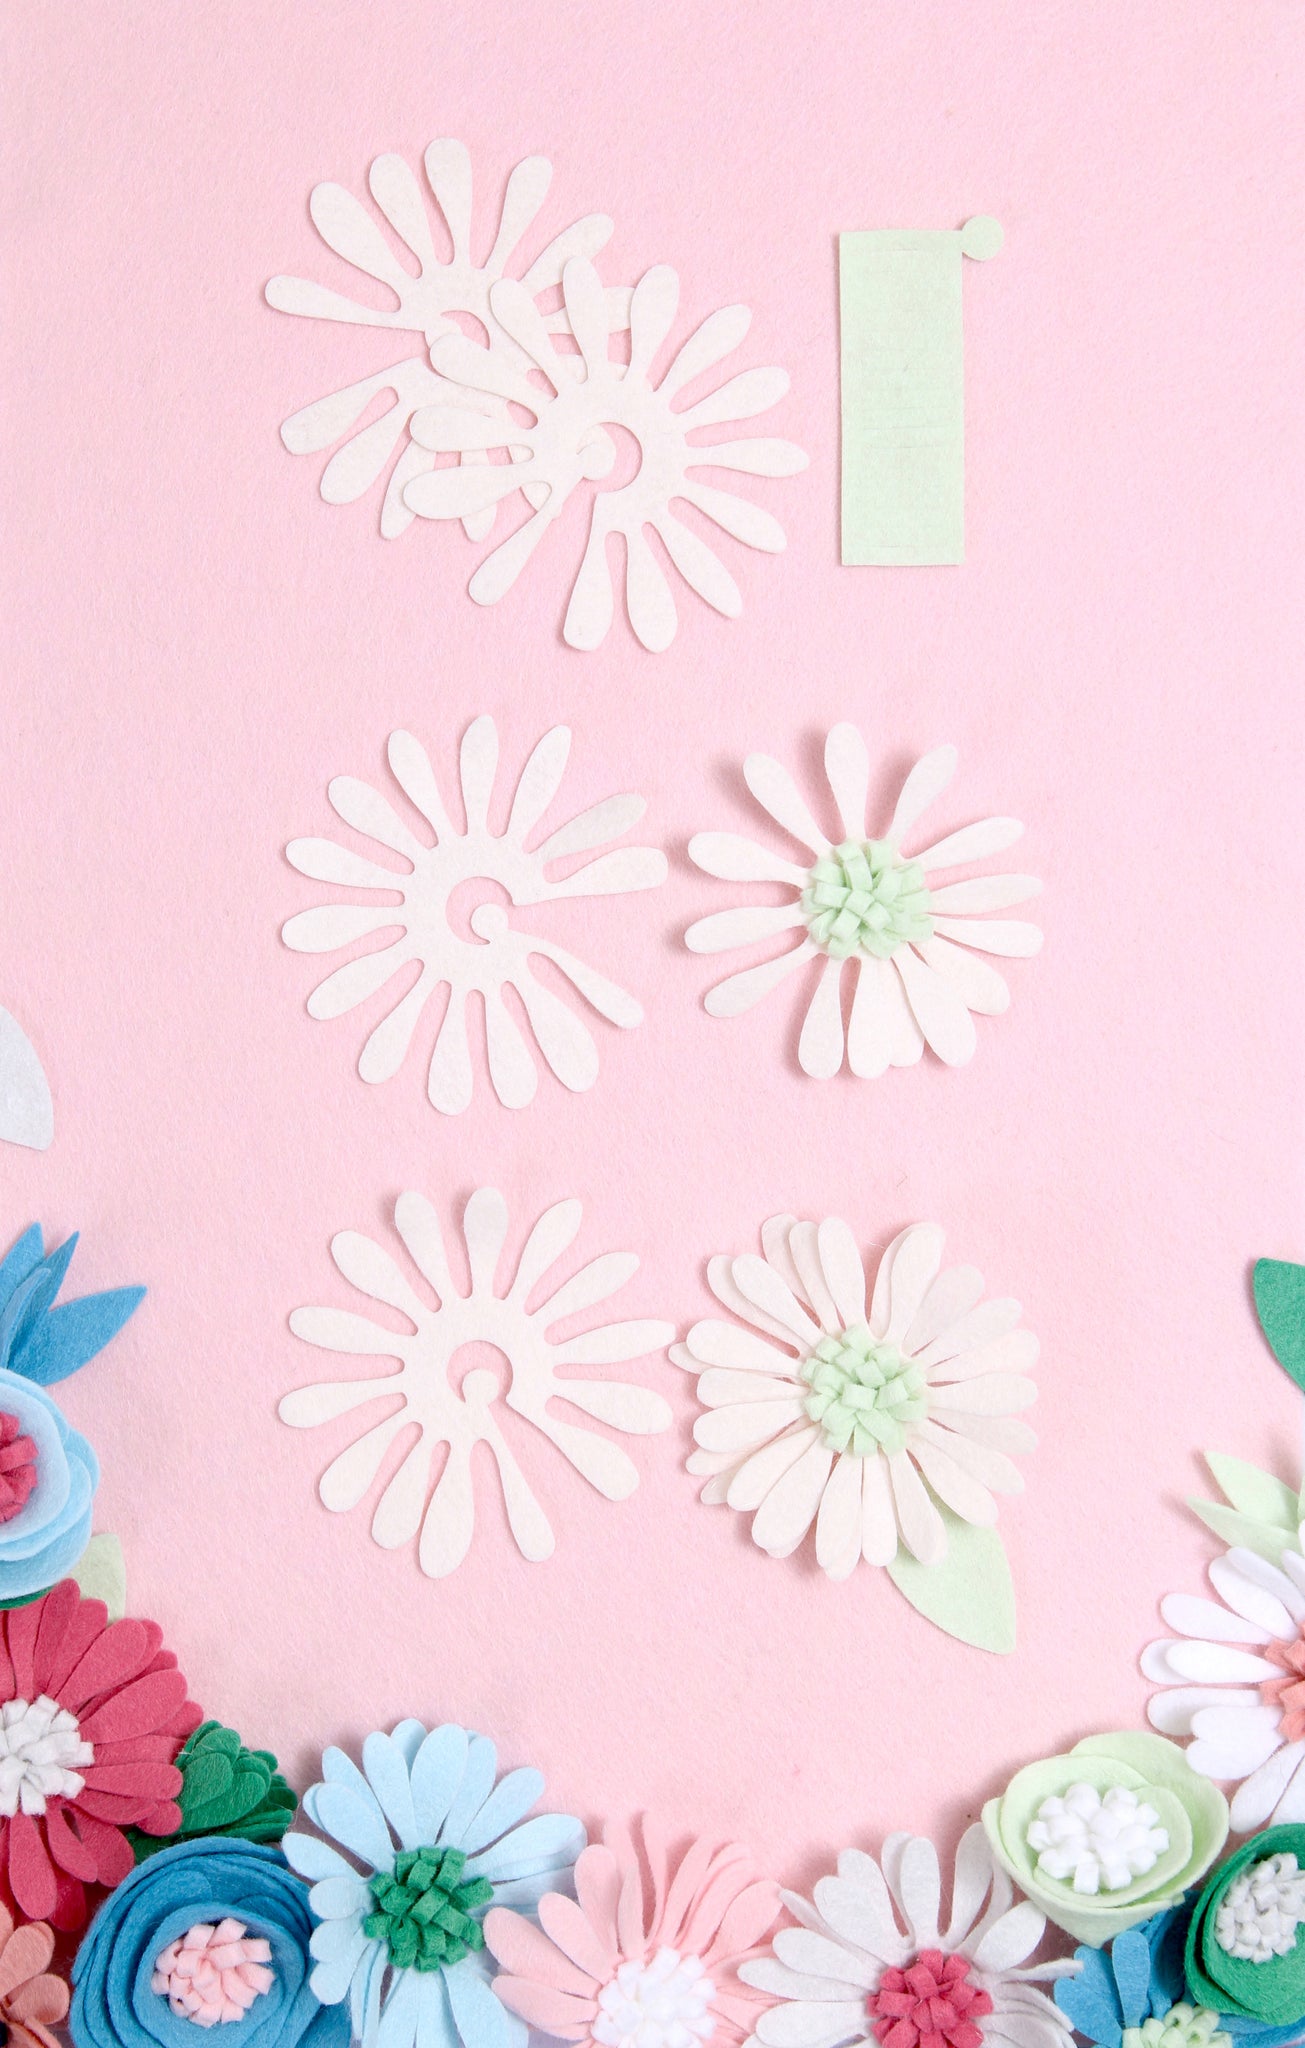 easy Felt Flowers. you can do it!!) basic way to make. Part 1 